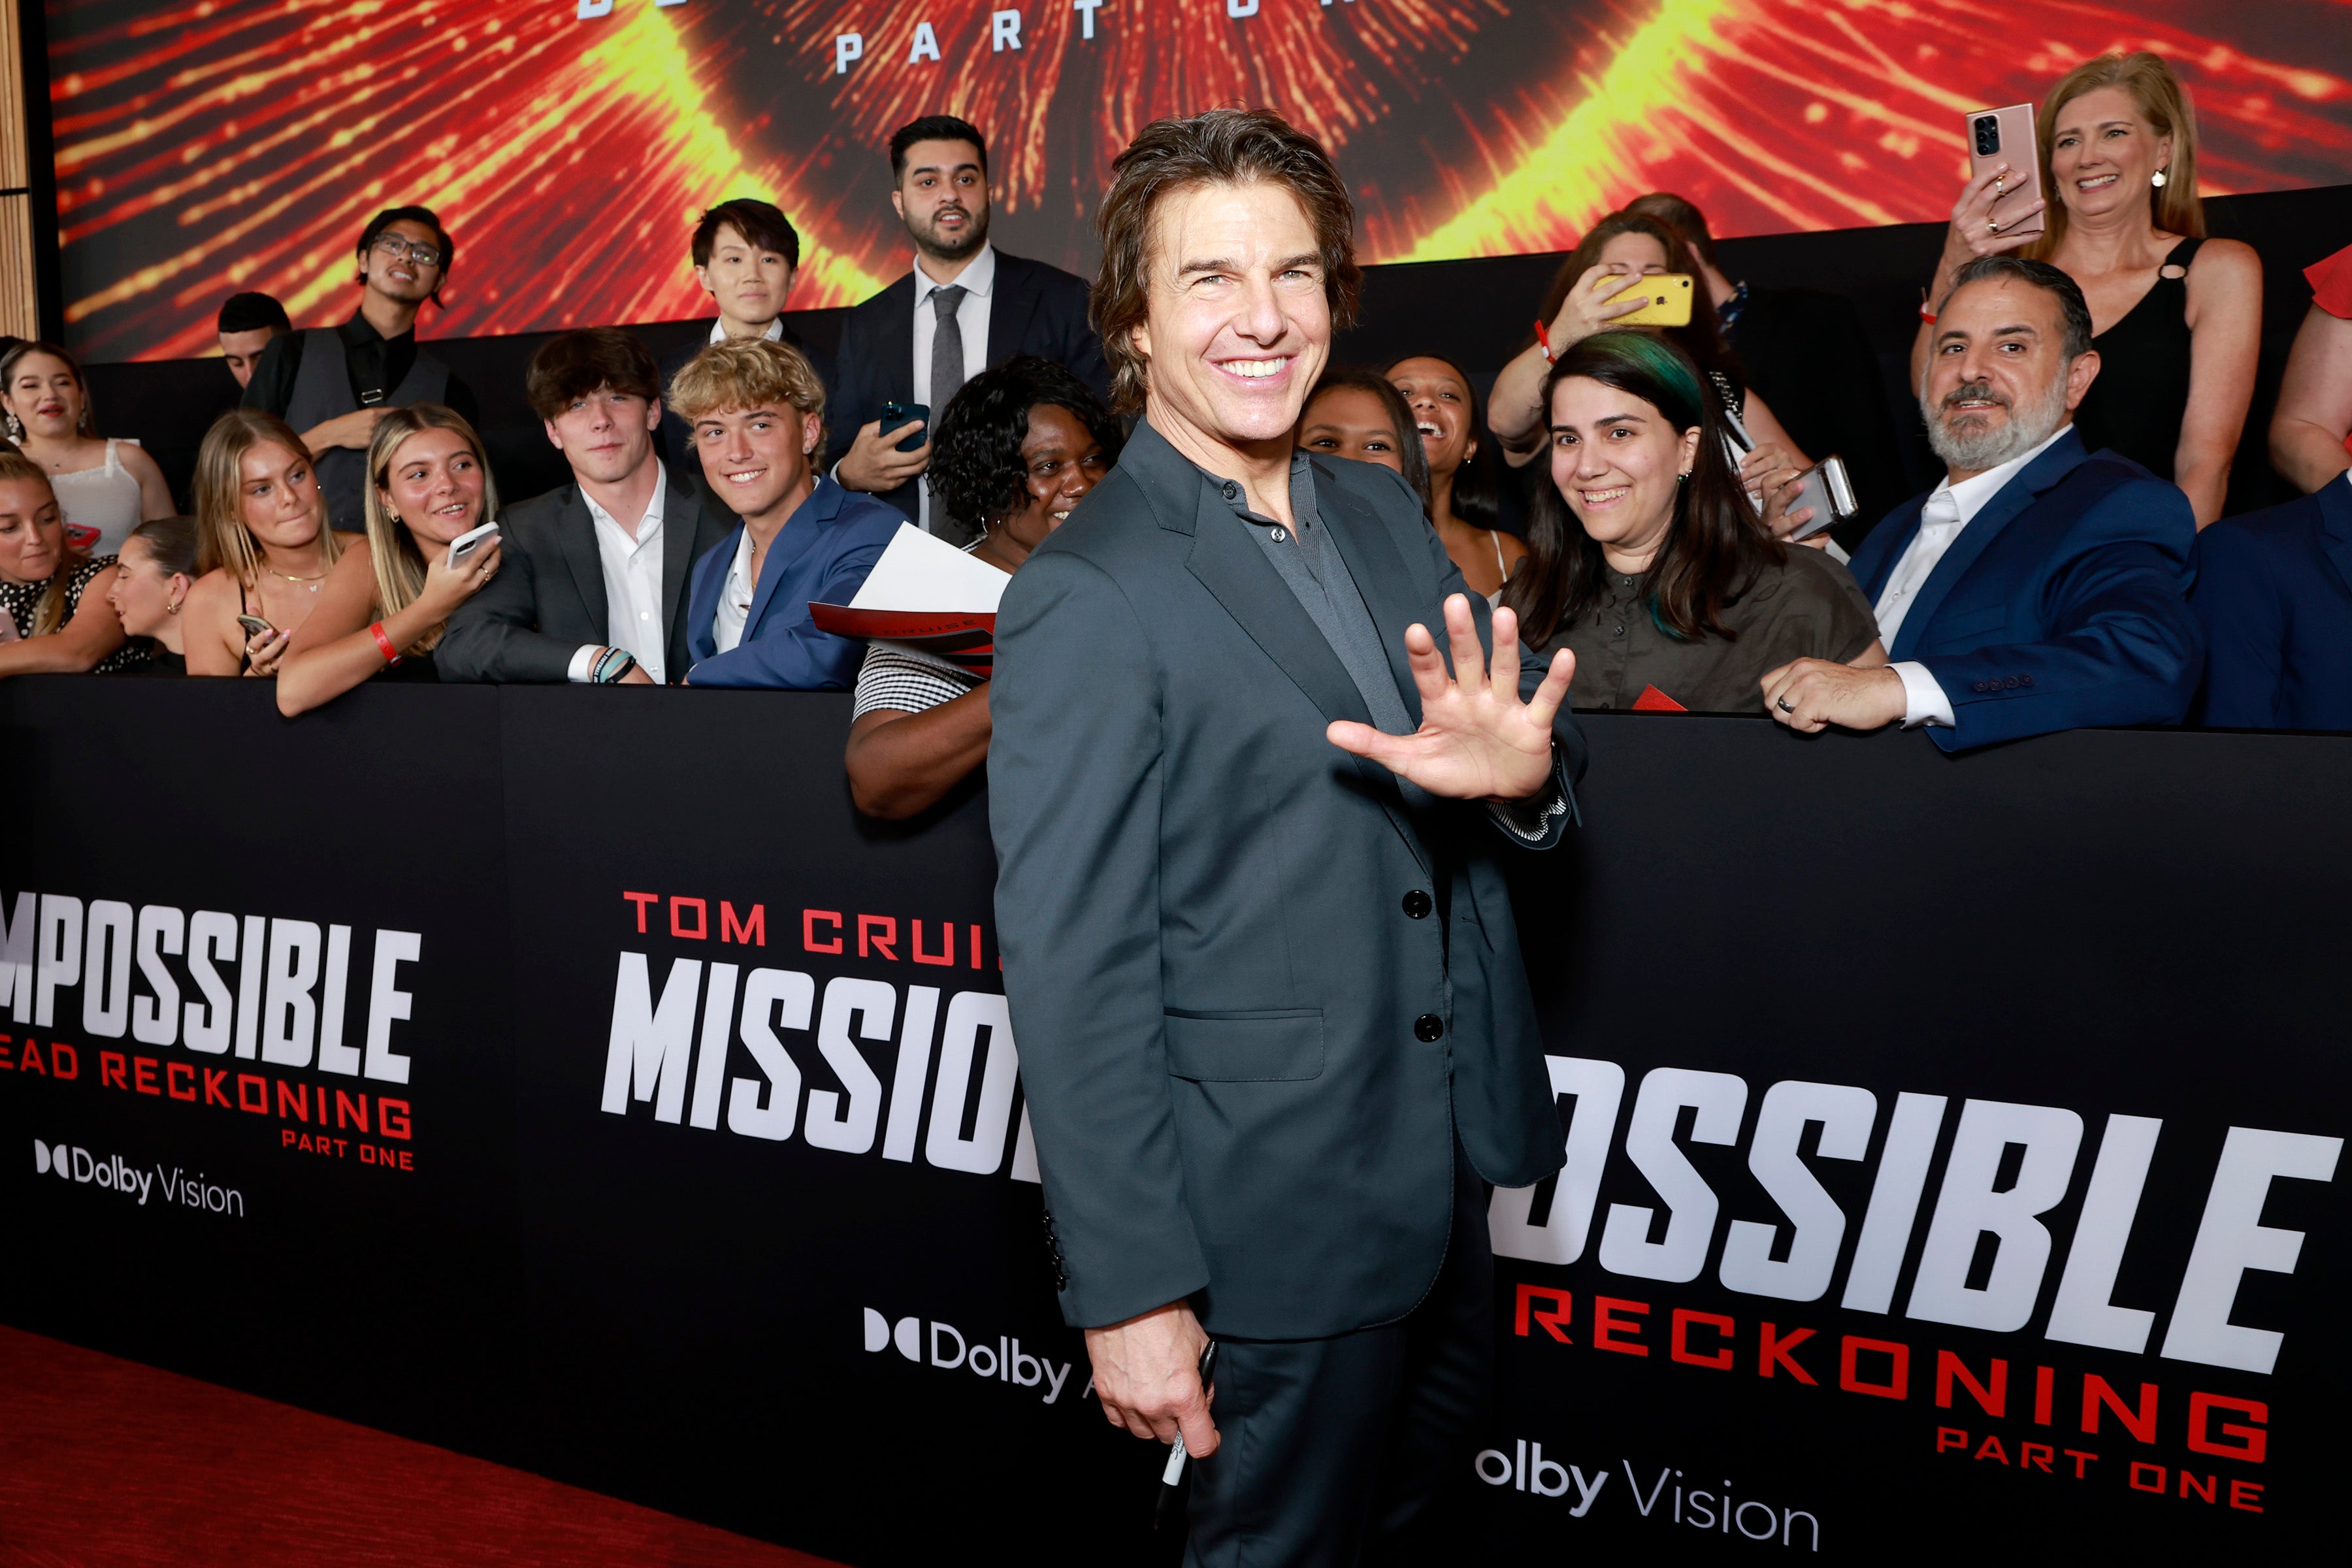 Tom Cruise’s ‘Mission: Impossible’ director says actor revealed ‘weirdest’ story about himself